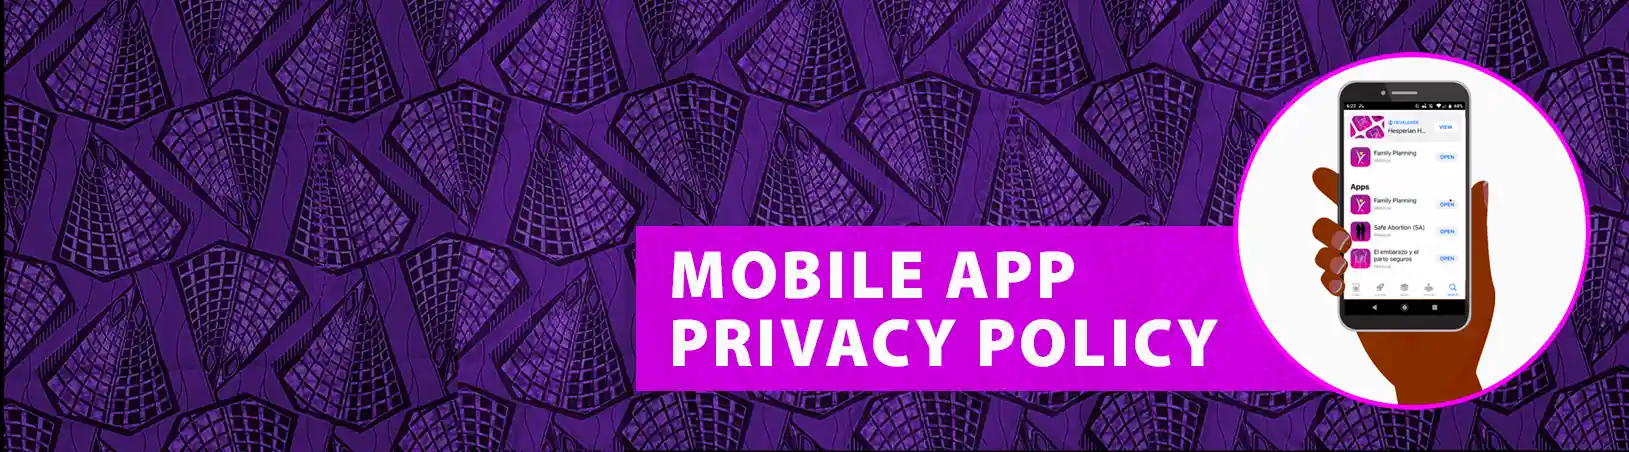 Mobile app privacy policy